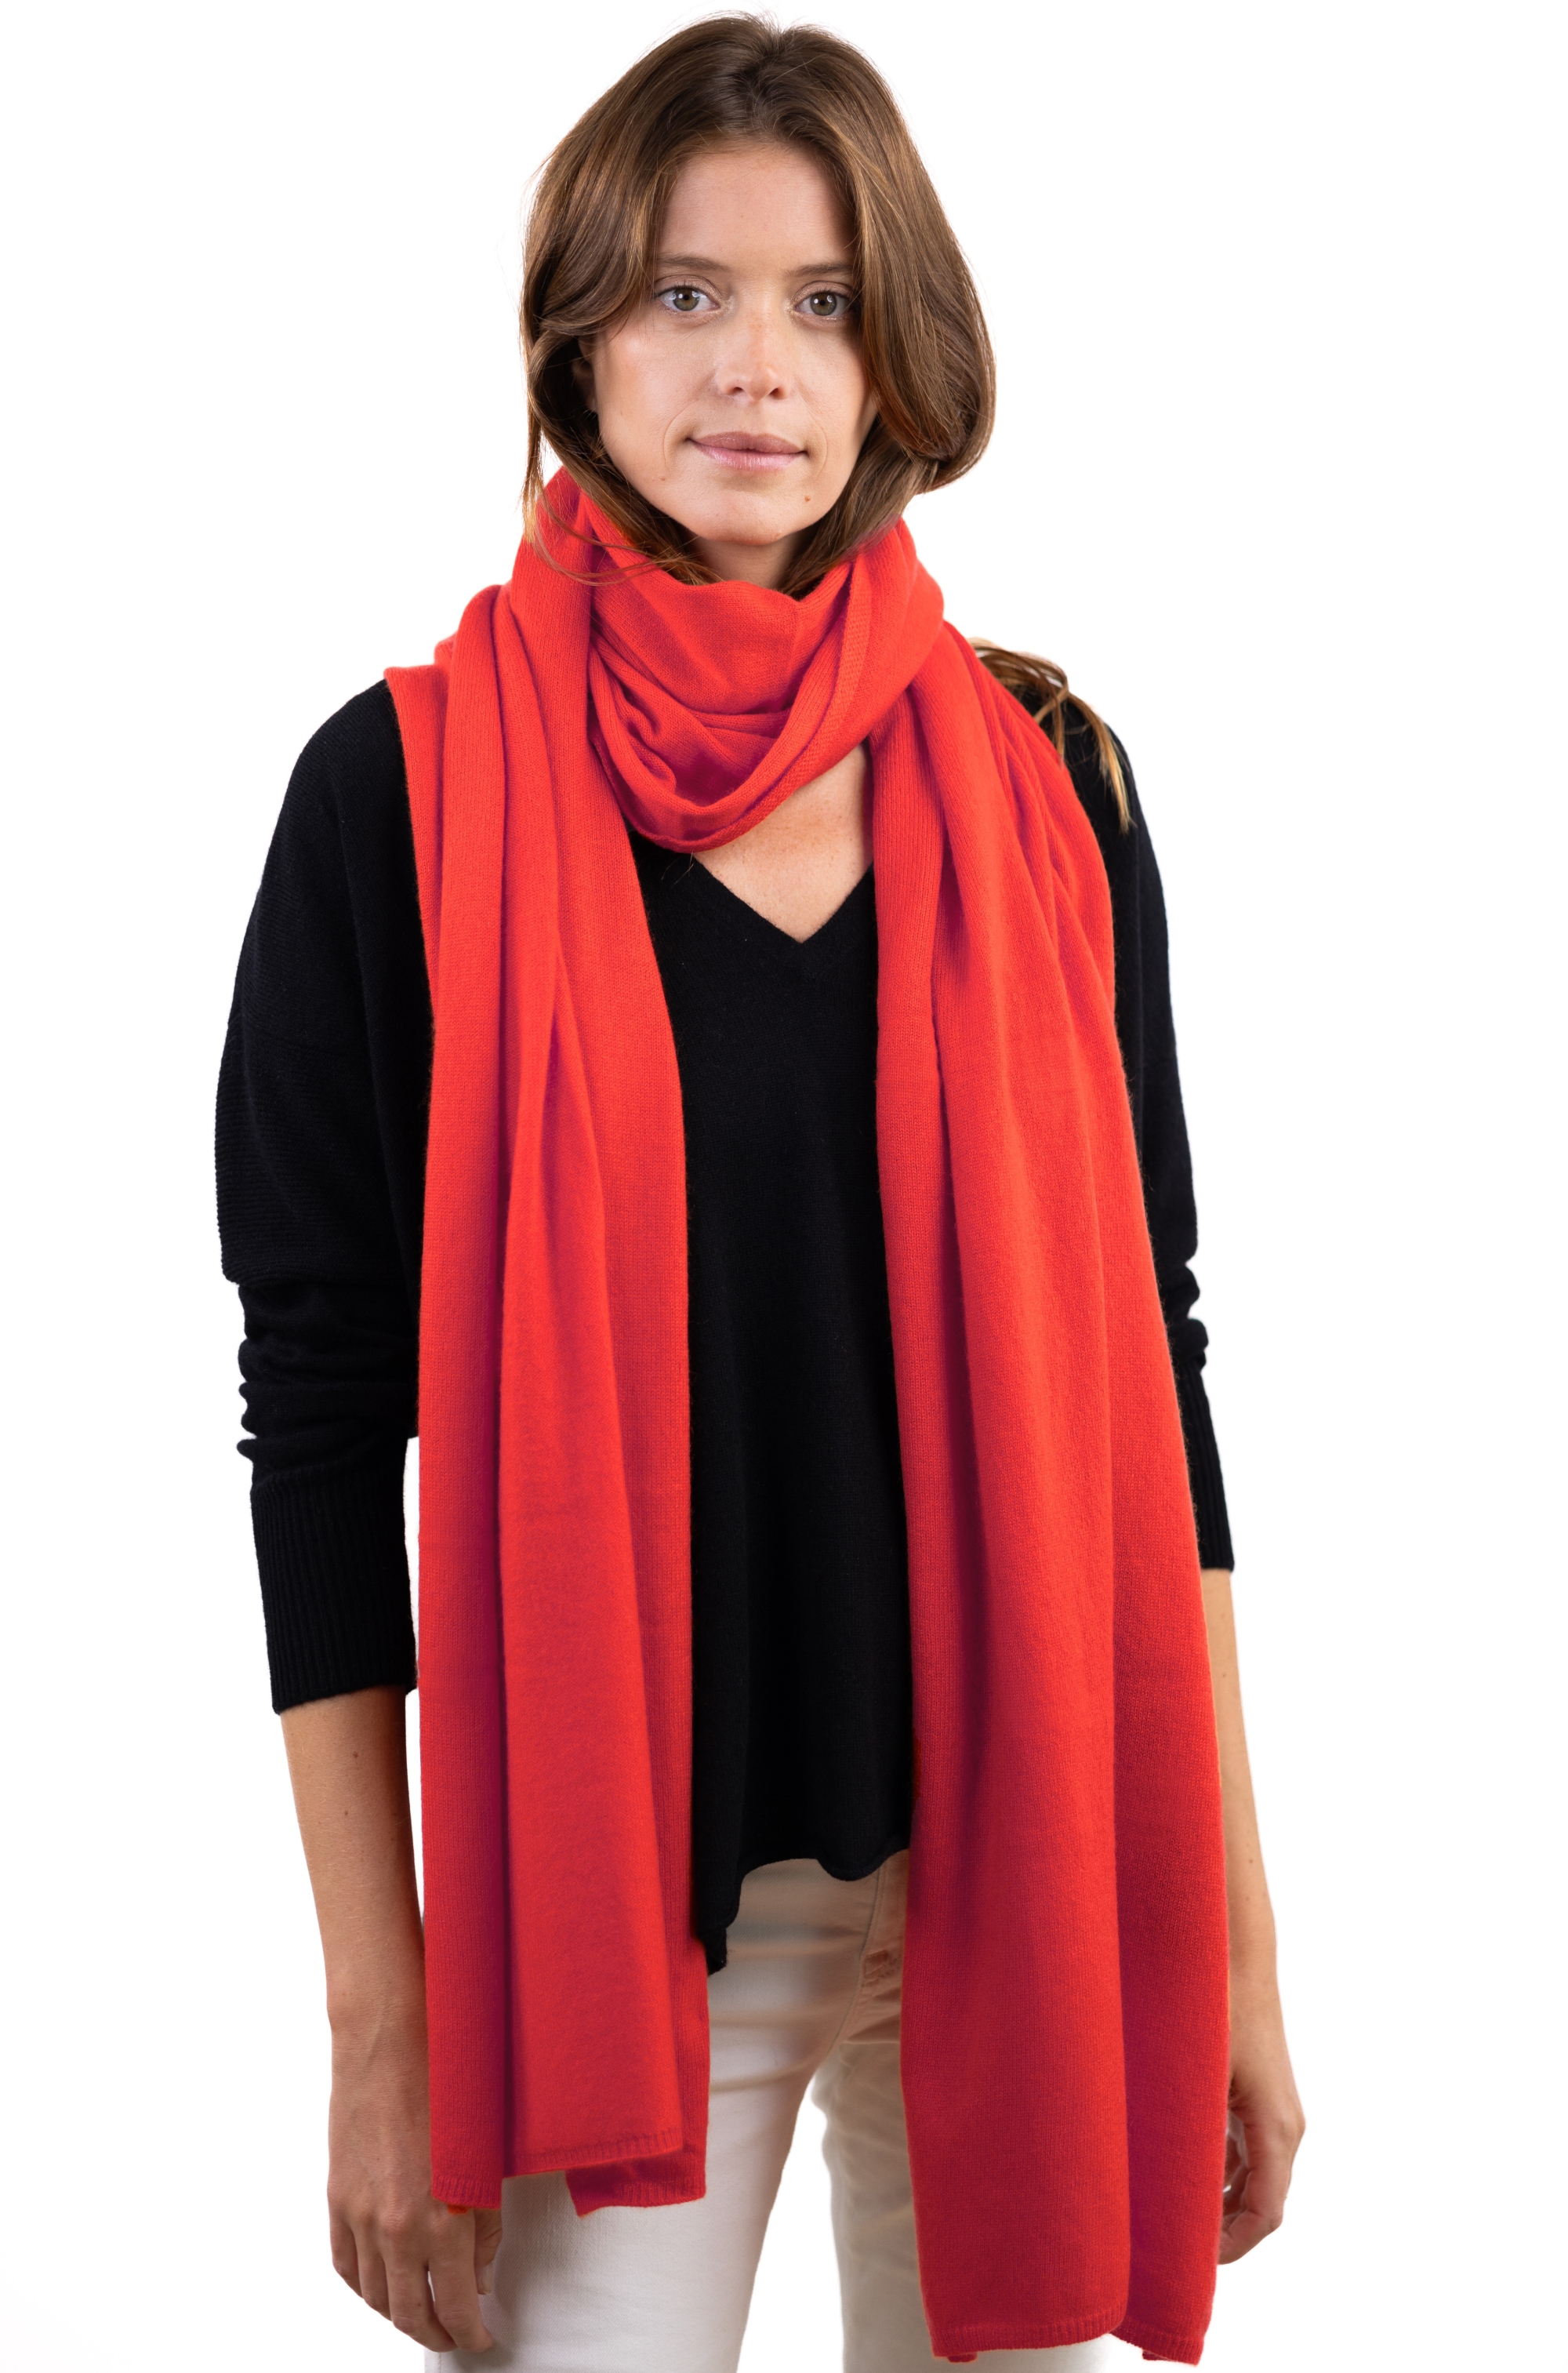 Cashmere accessories scarves mufflers wifi rouge 230cm x 60cm